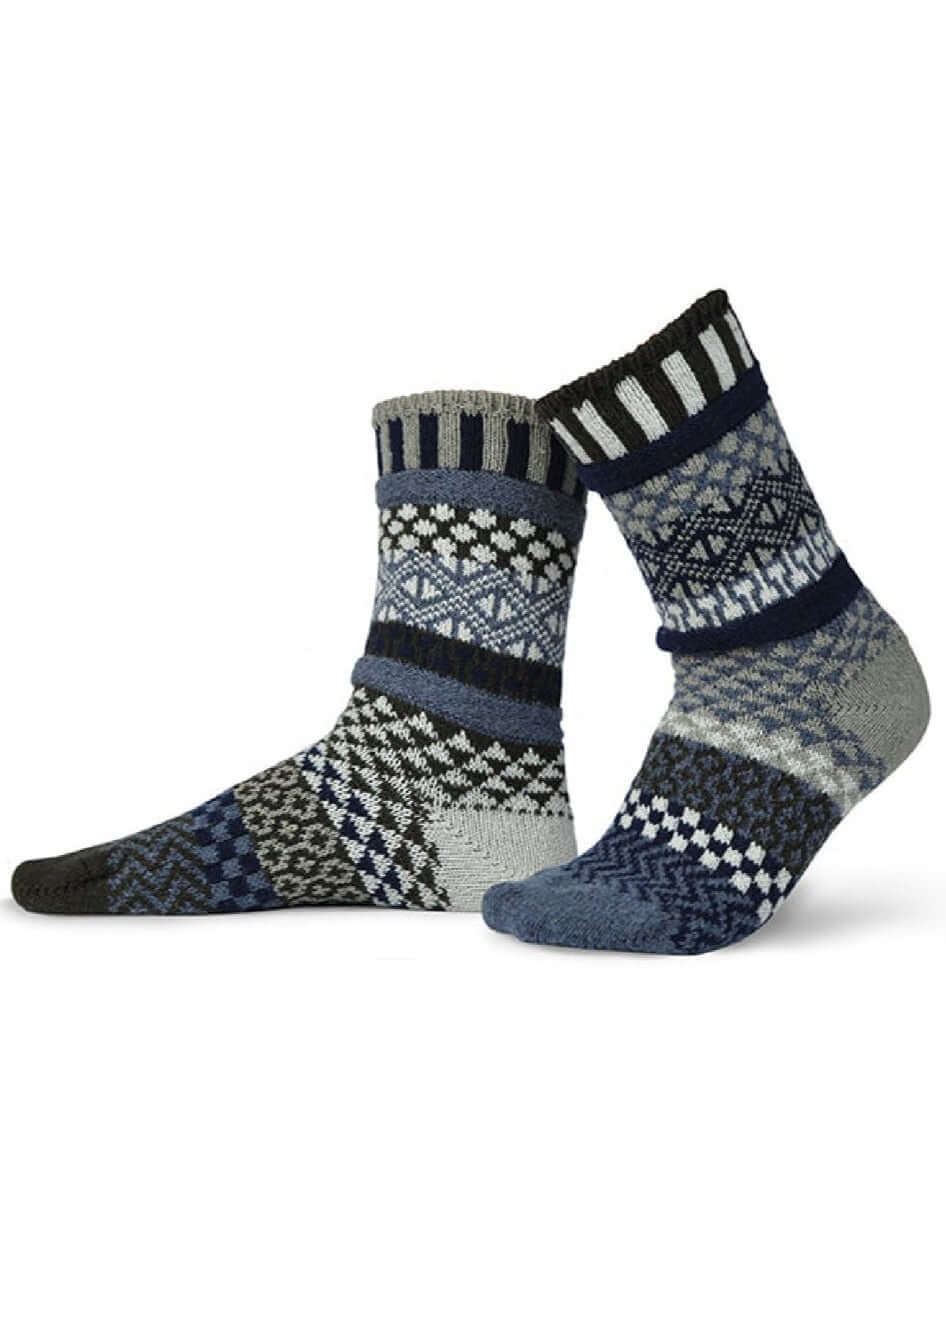 Solmate BIRCH Wool Blend Knitted Crew Socks Proudly Made USA | These socks are delightfully mismatched & so very comfortable.  Made in America Boutique